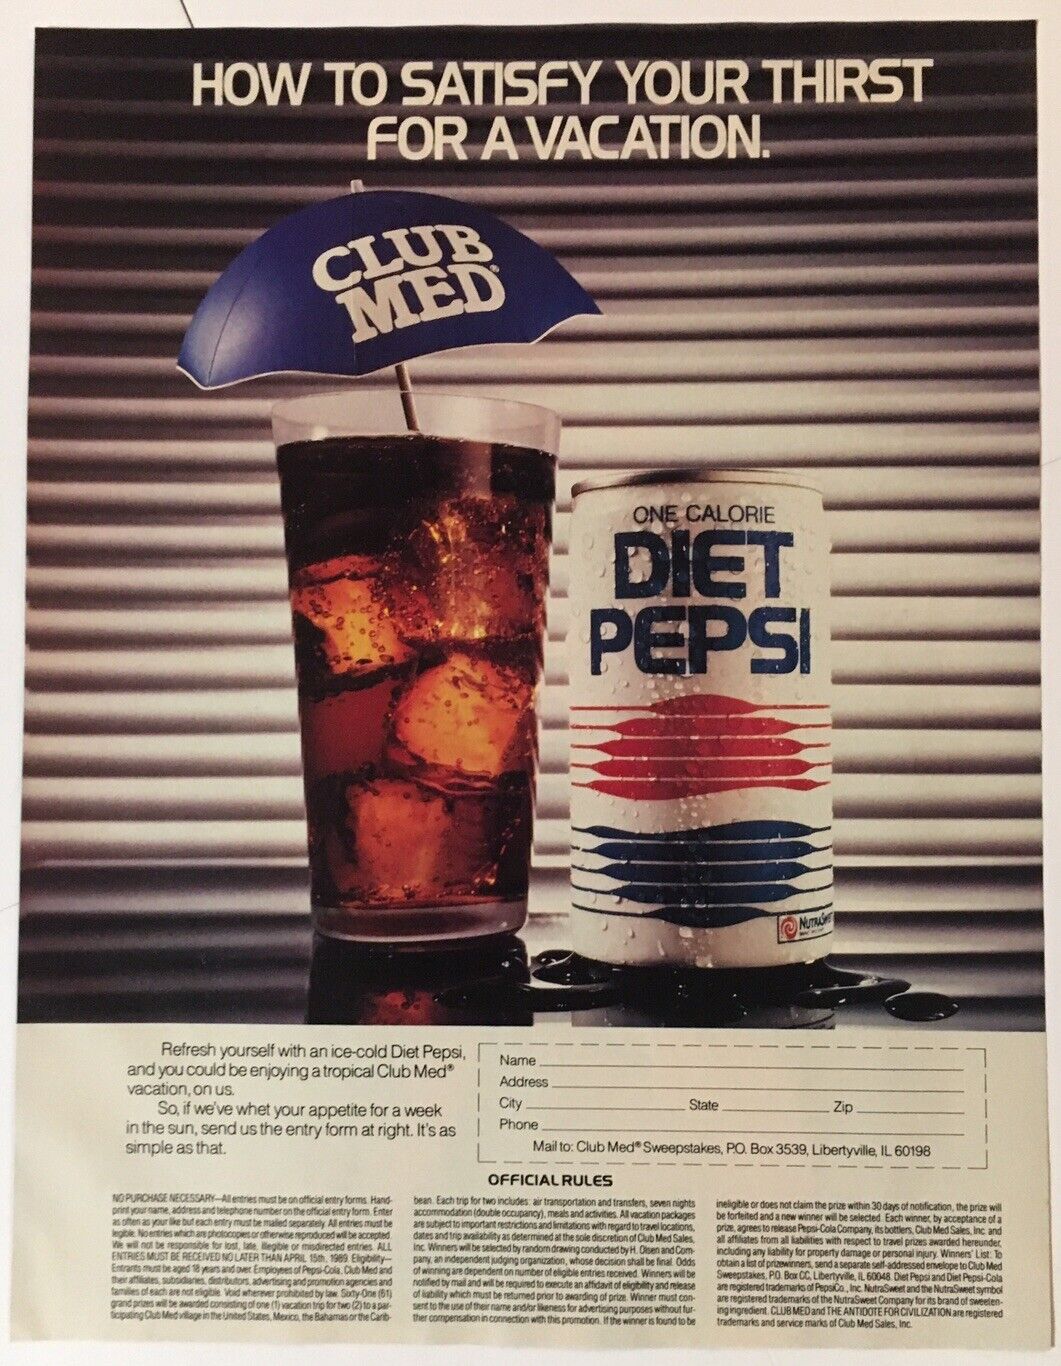 Diet Pepsi Club Med 1989 Vintage Print Ad 8x11 Inches Wall Decor